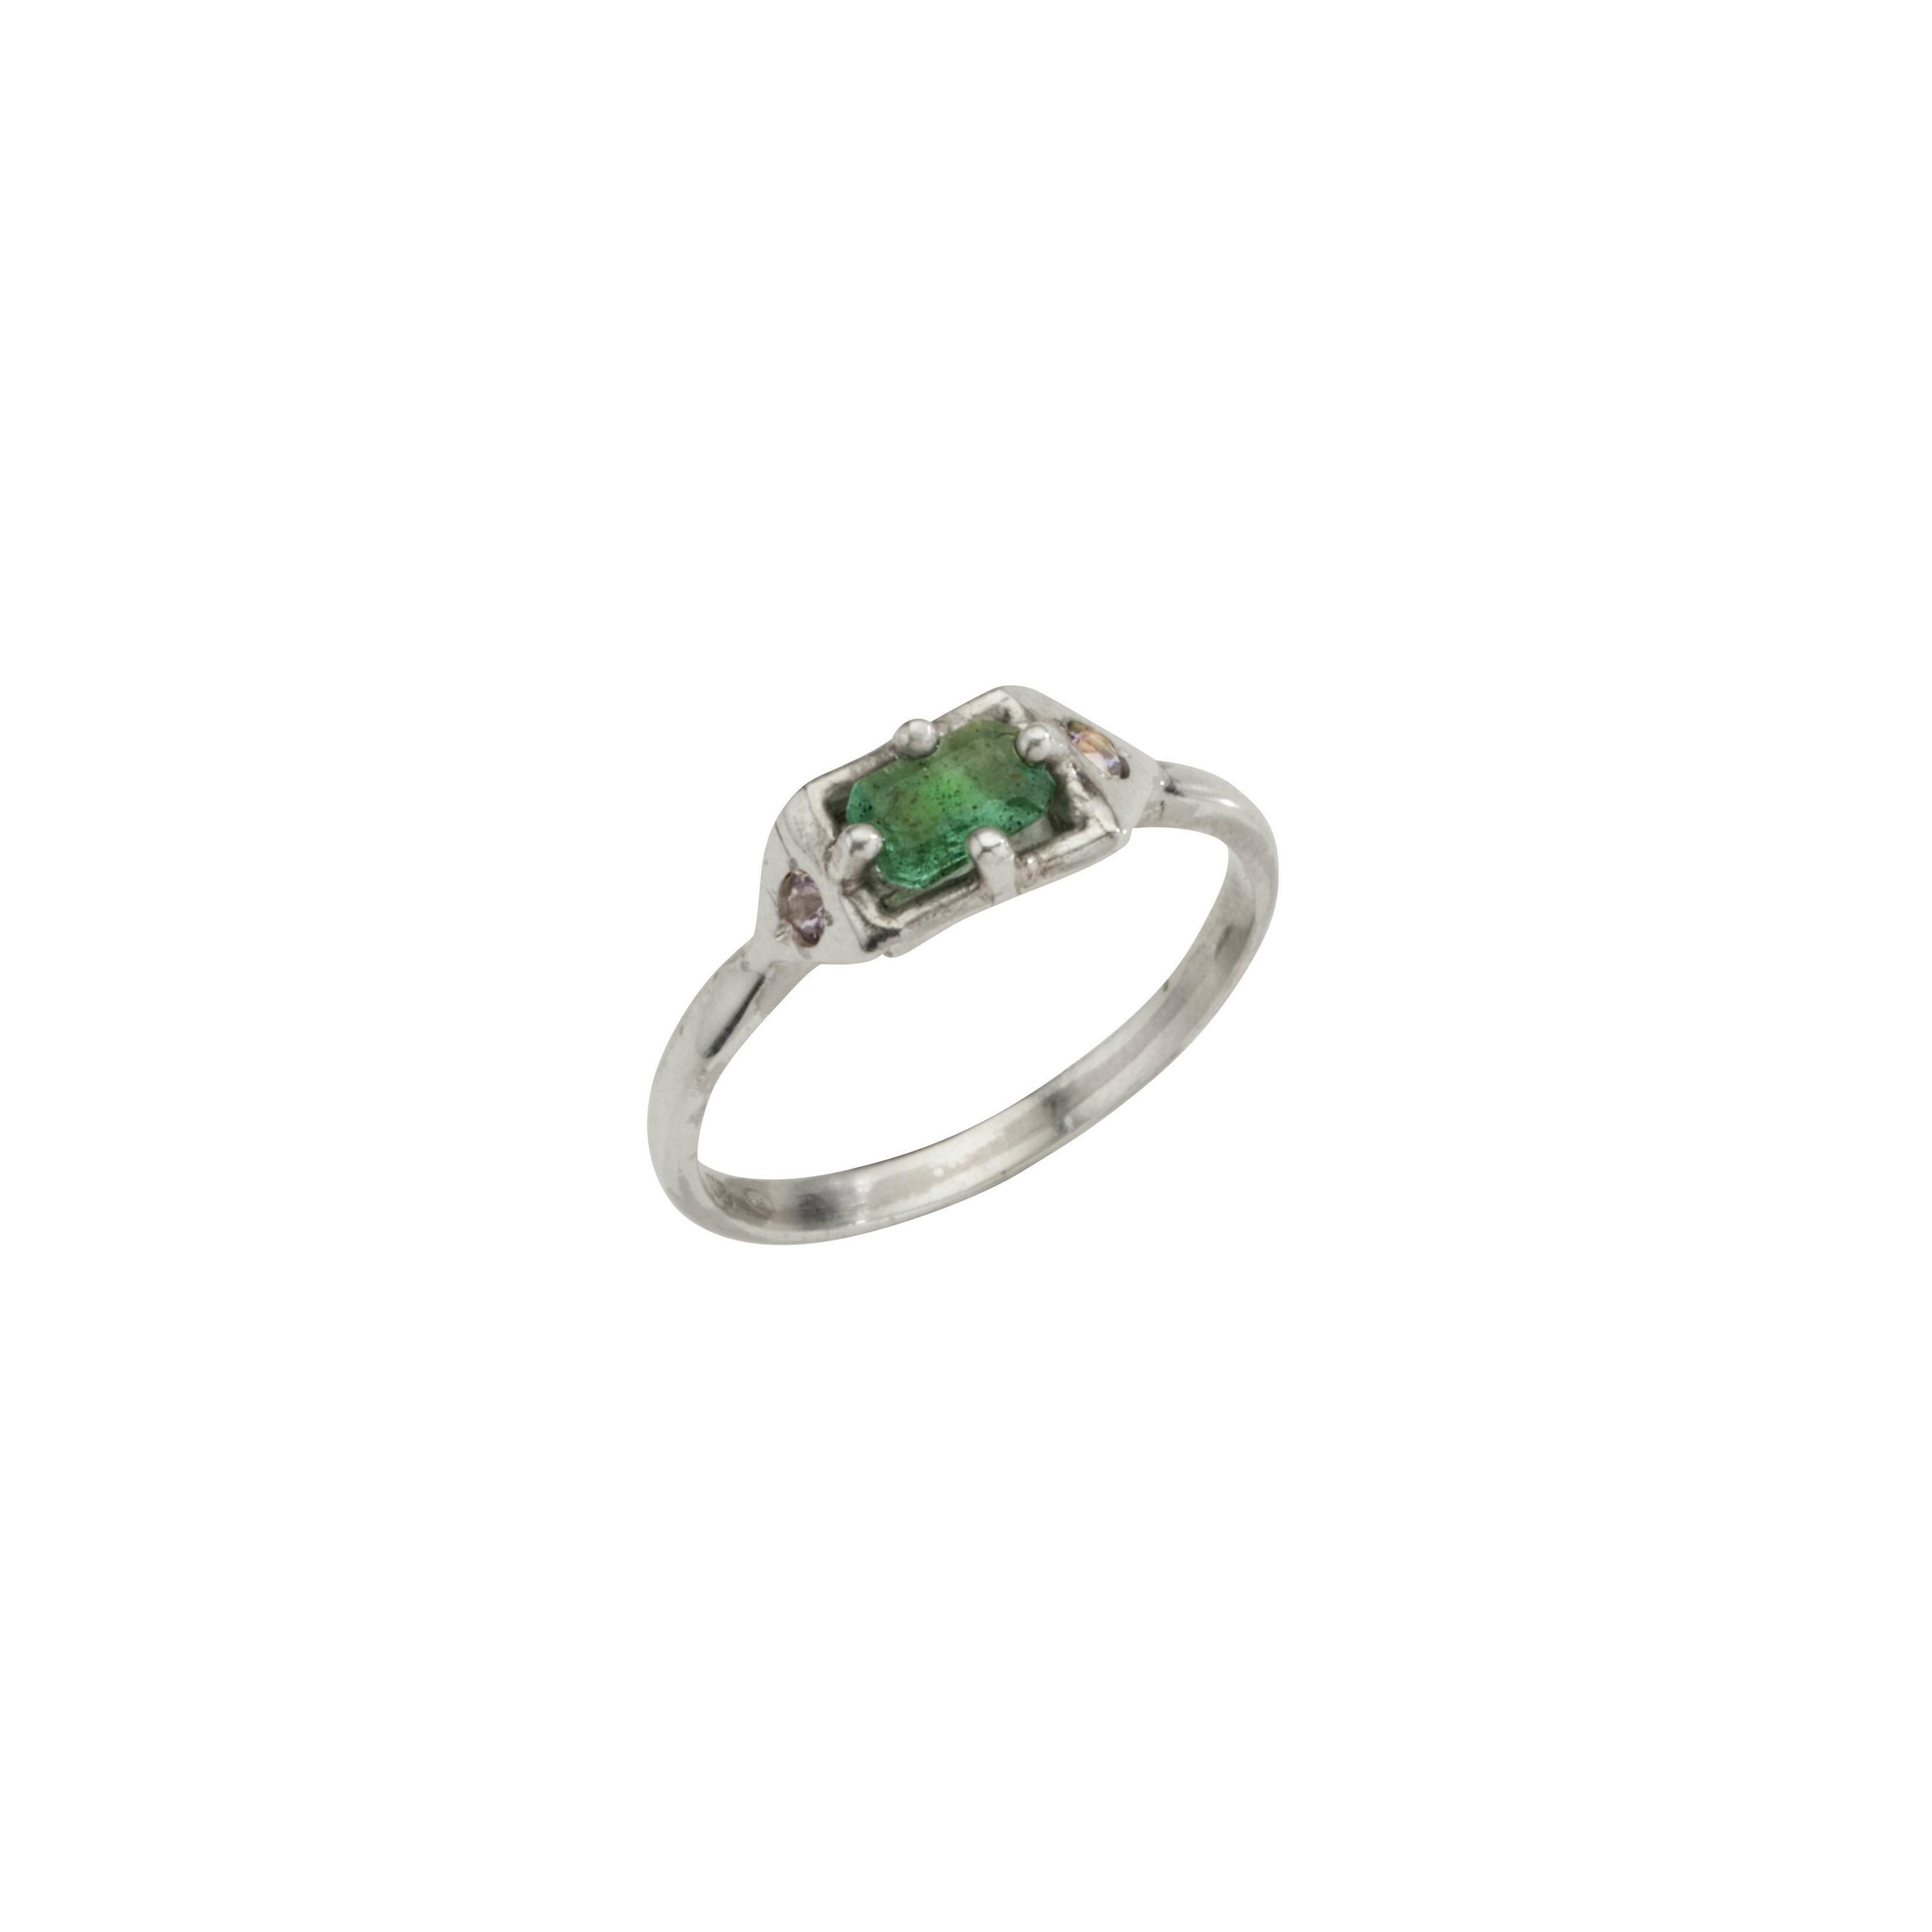 For Sale:  Nortia Ring with Emerald & Amethyst, Sterling Silver